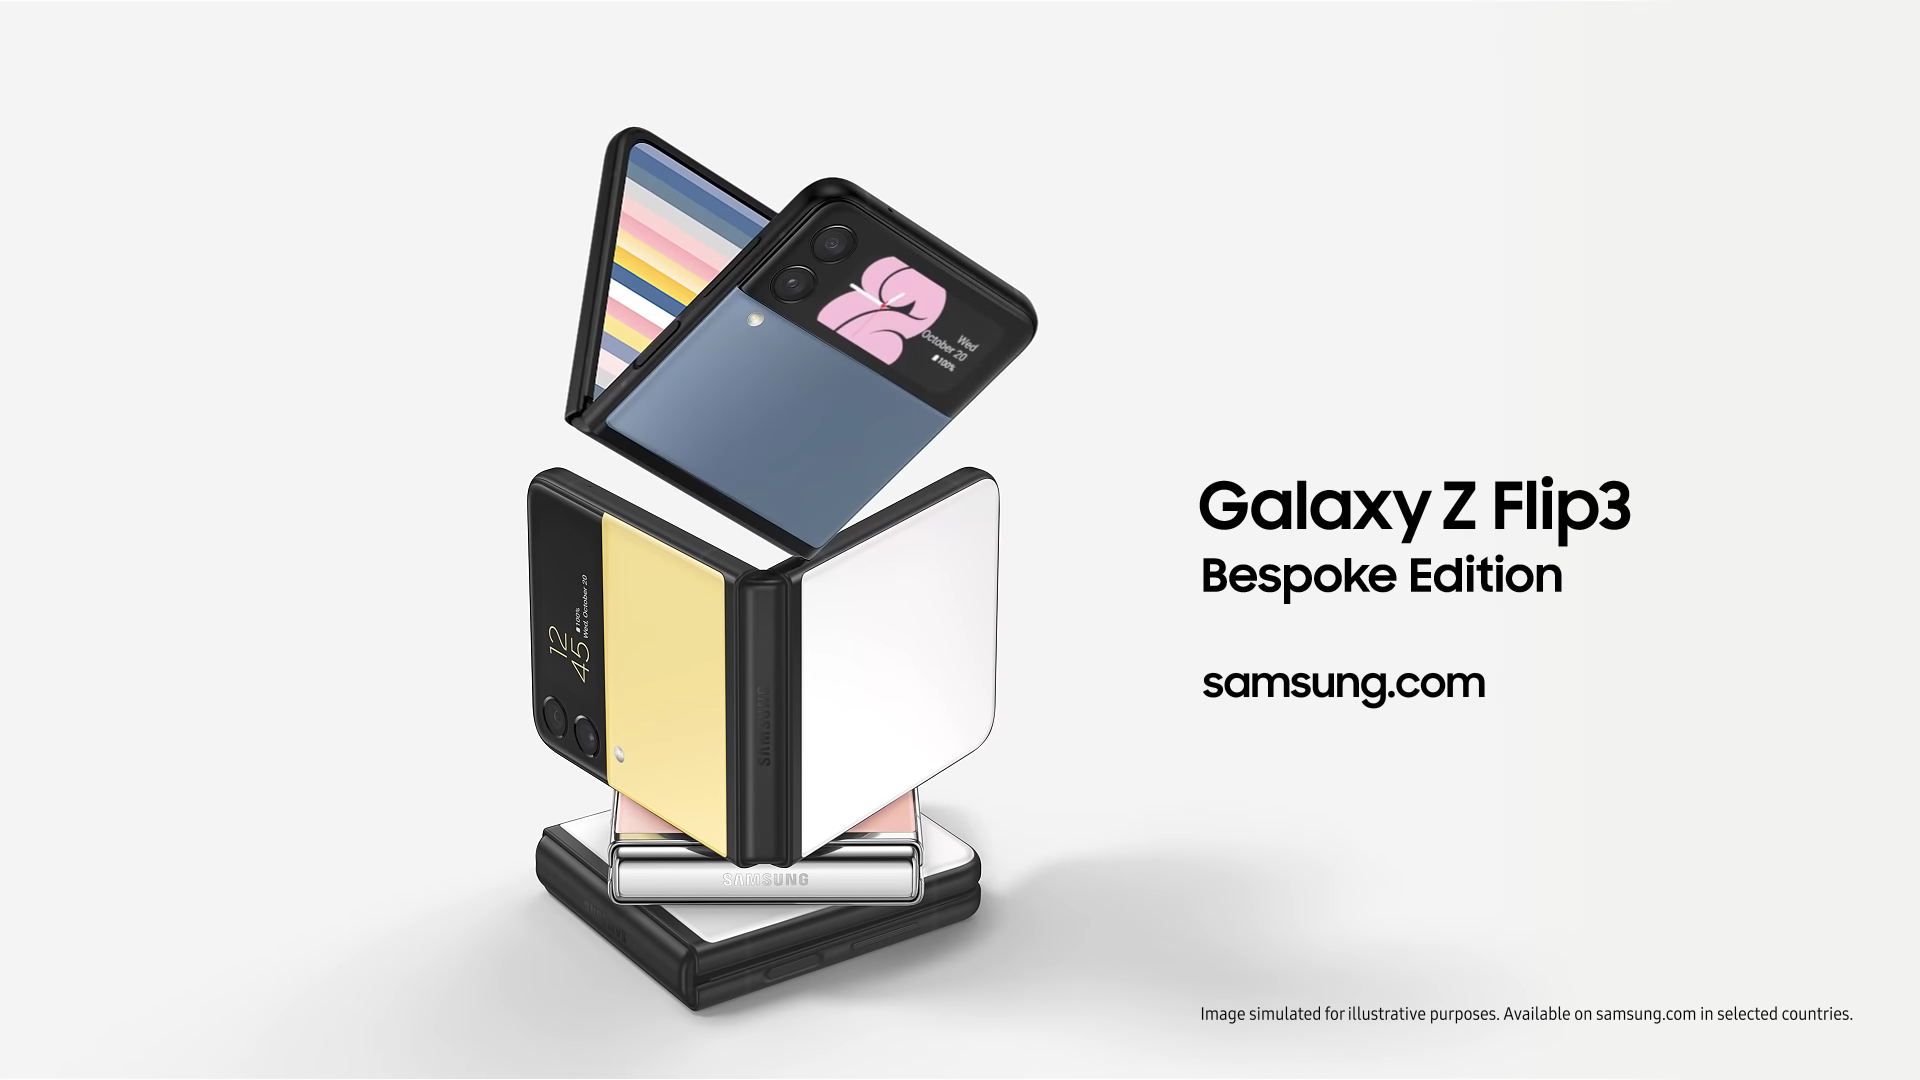 Samsung Galaxy Z Flip 3 Bespoke Edition announced - colours to suit all tastes for an extra €50